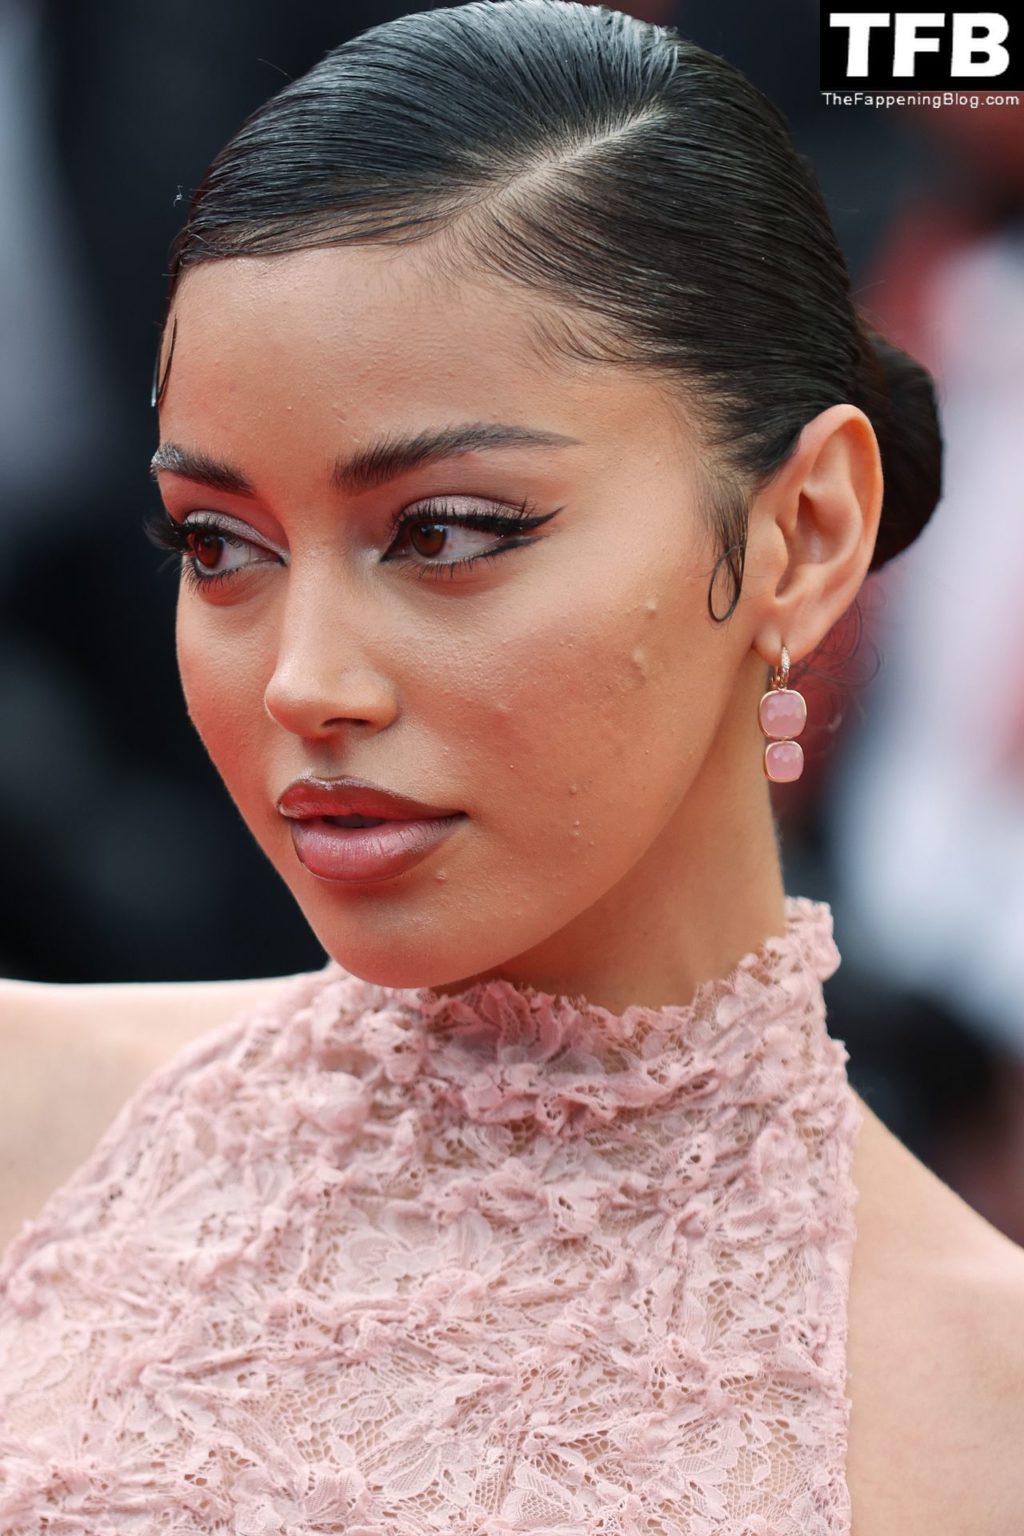 Cindy Kimberly See Through Nudity The Fappening Blog 5 2 1024x1536 - Cindy Kimberly Displays Her Nude Tits at the 75th Annual Cannes Film Festival (29 Photos)